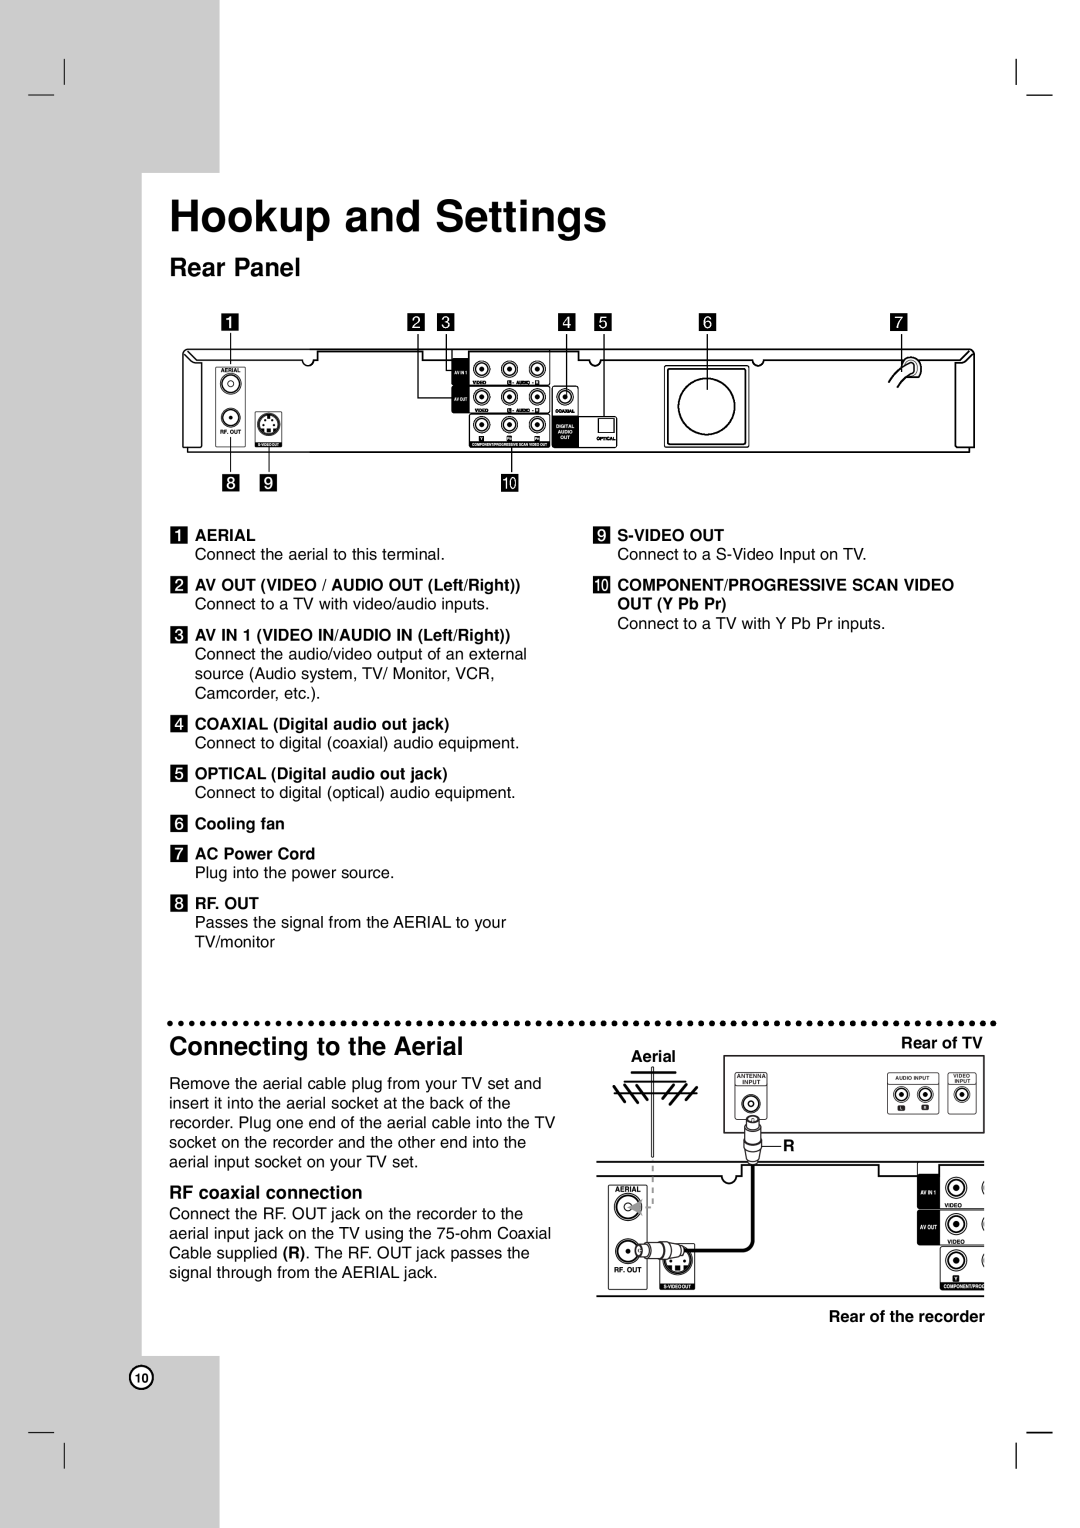 NEC NDH-81 Hookup and Settings, Rear Panel, Connecting to the Aerial, RF coaxial connection, a AERIAL, h RF. OUT 